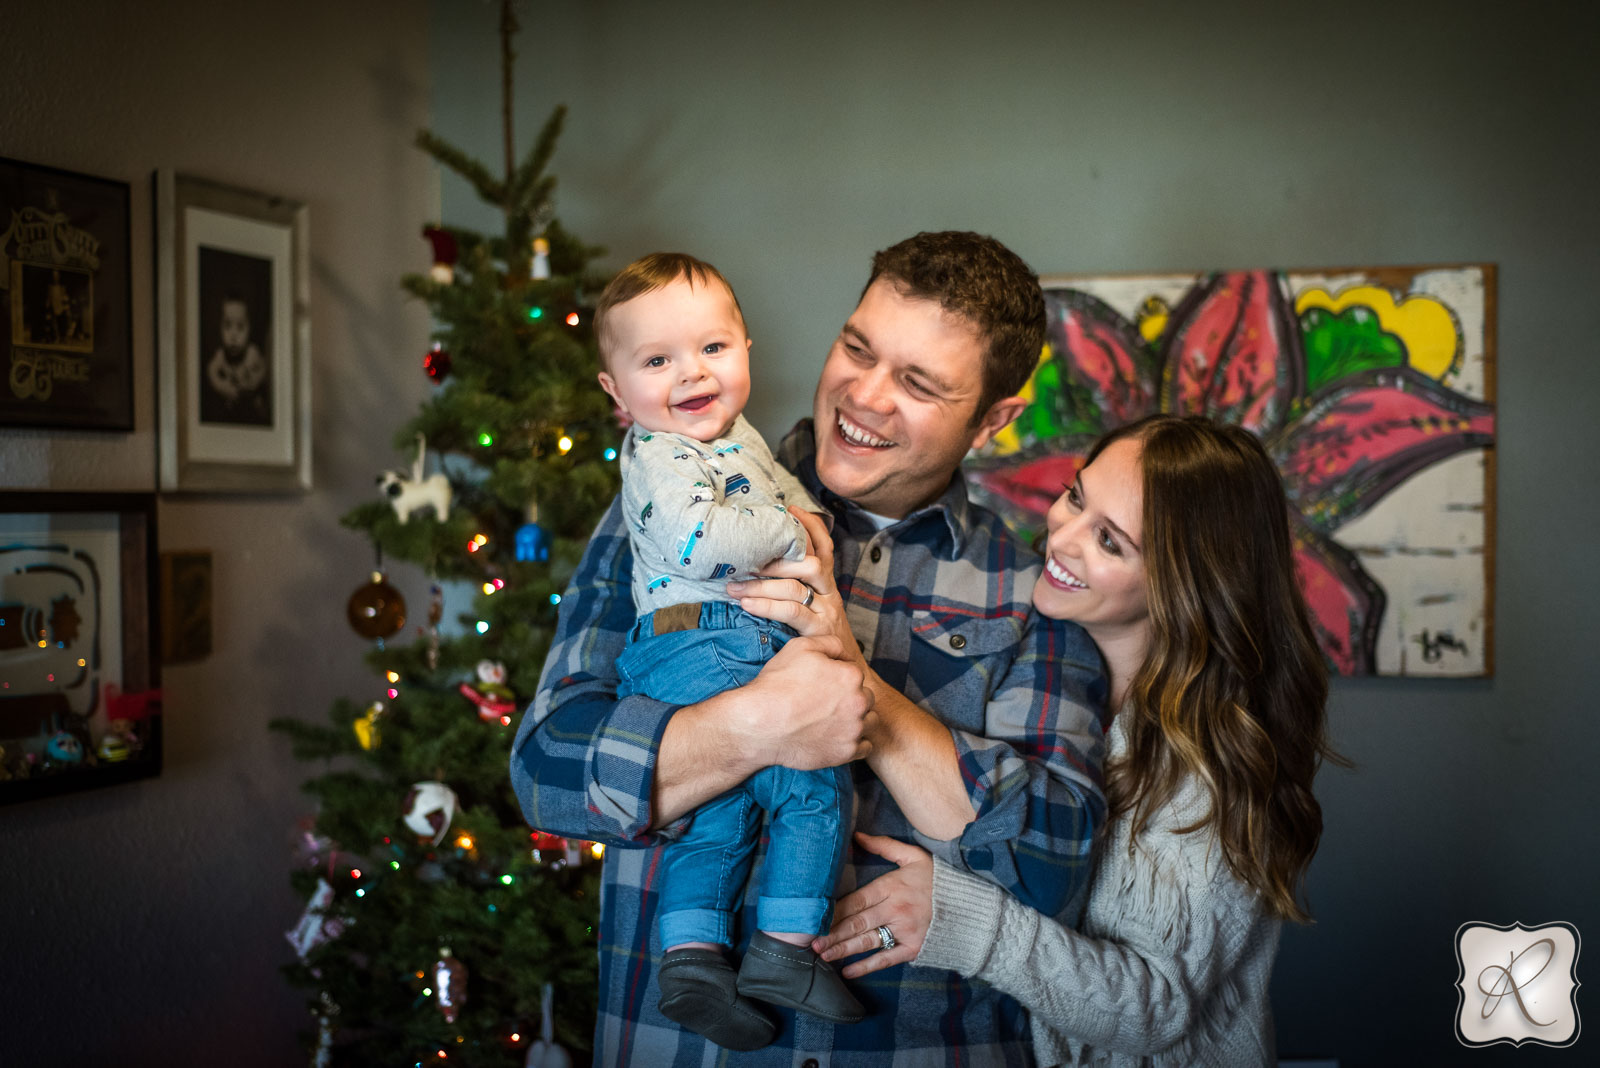 professional family portraits by Allison Ragsdale Photography in Durango, Colorado